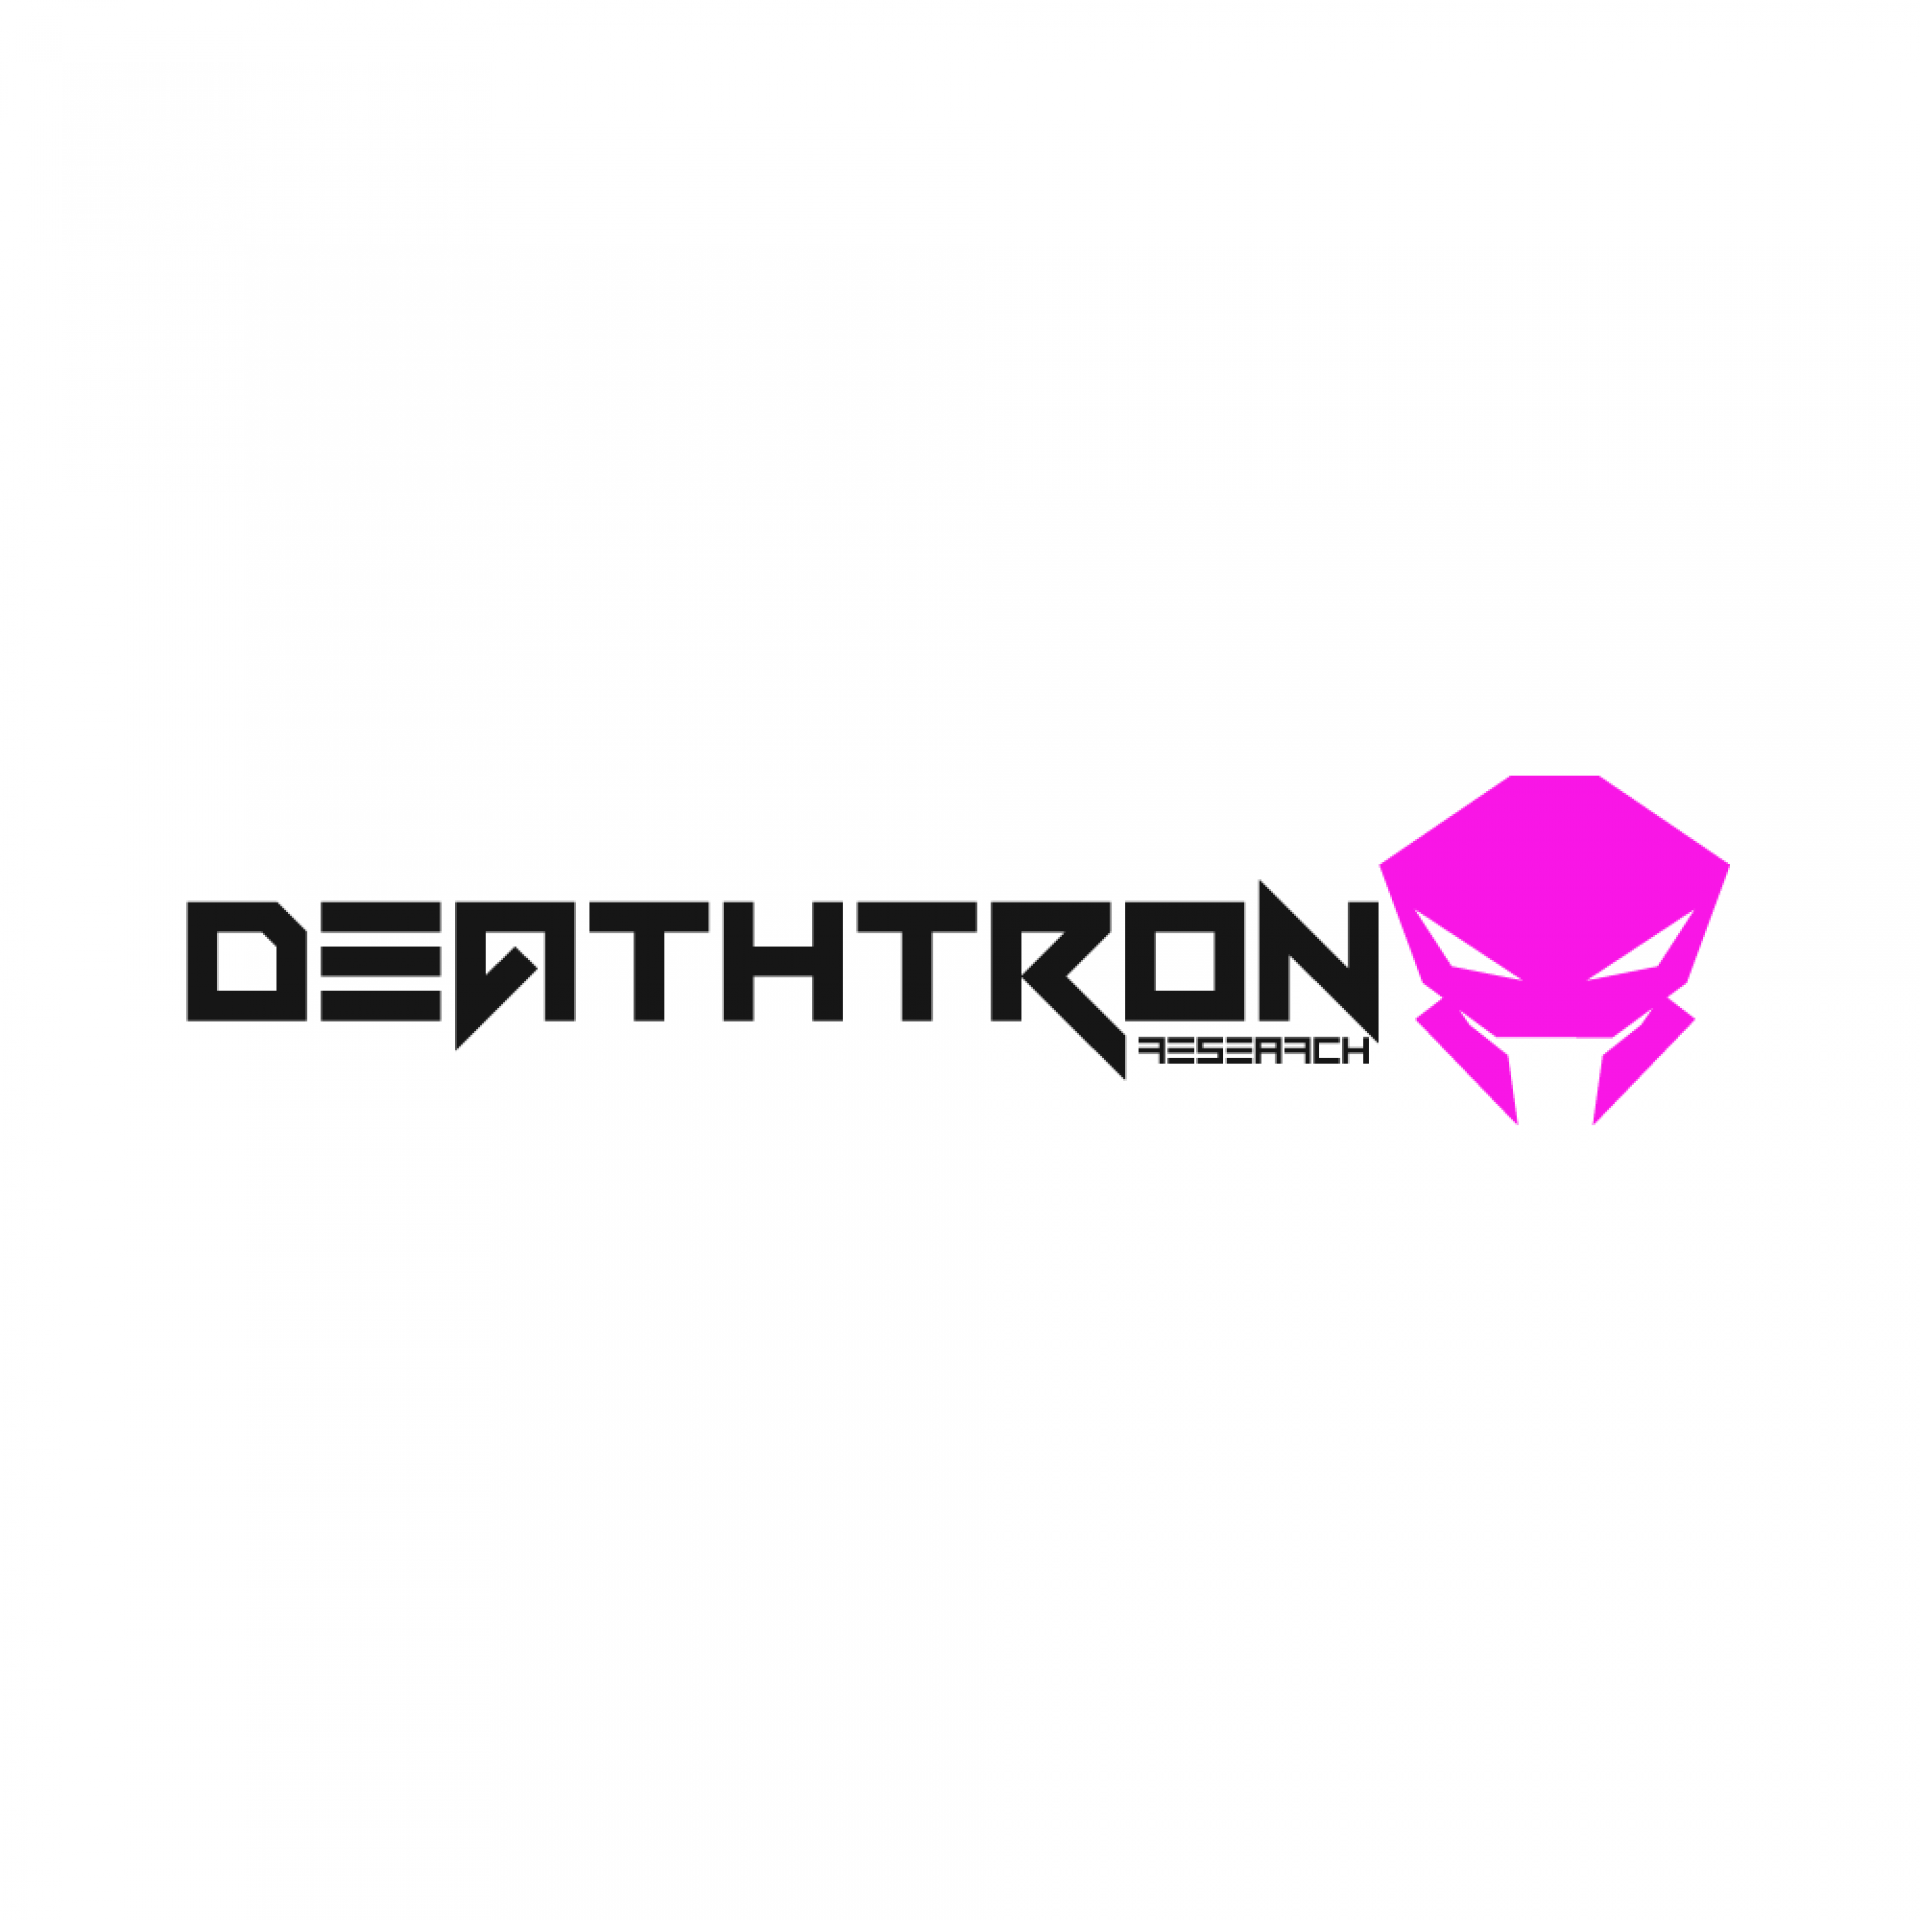 Deathron Research